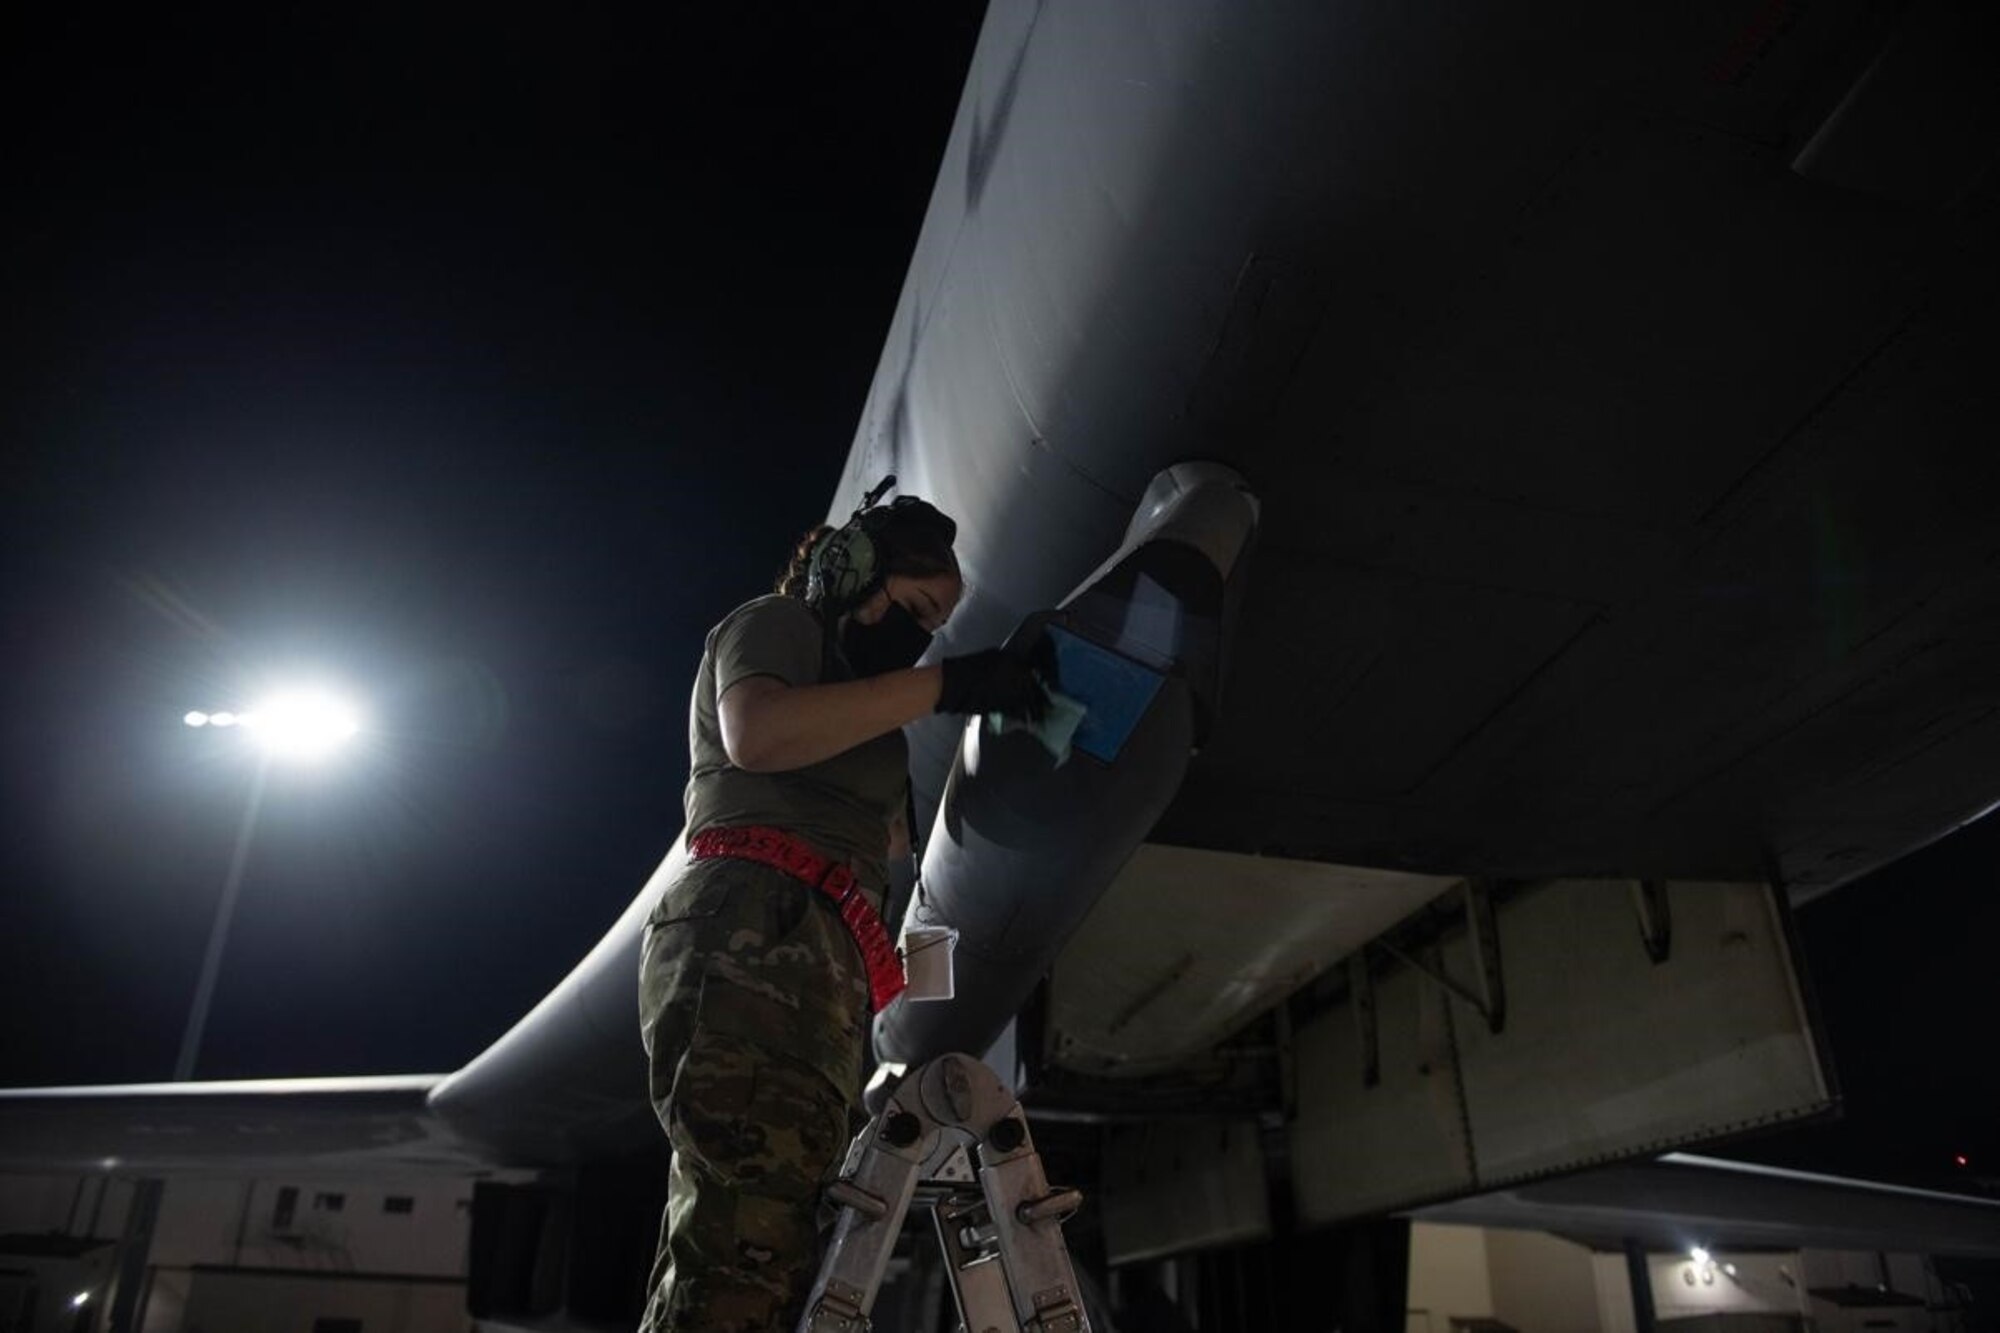 A crew chief from the 28th Aircraft Maintenance Squadron inspects and cleans a sniper advanced targeting pod on a B-1B Lancer in preparation for a Bomber Task Force mission at Ellsworth Air Force Base, S.D., Sept. 7, 2021.